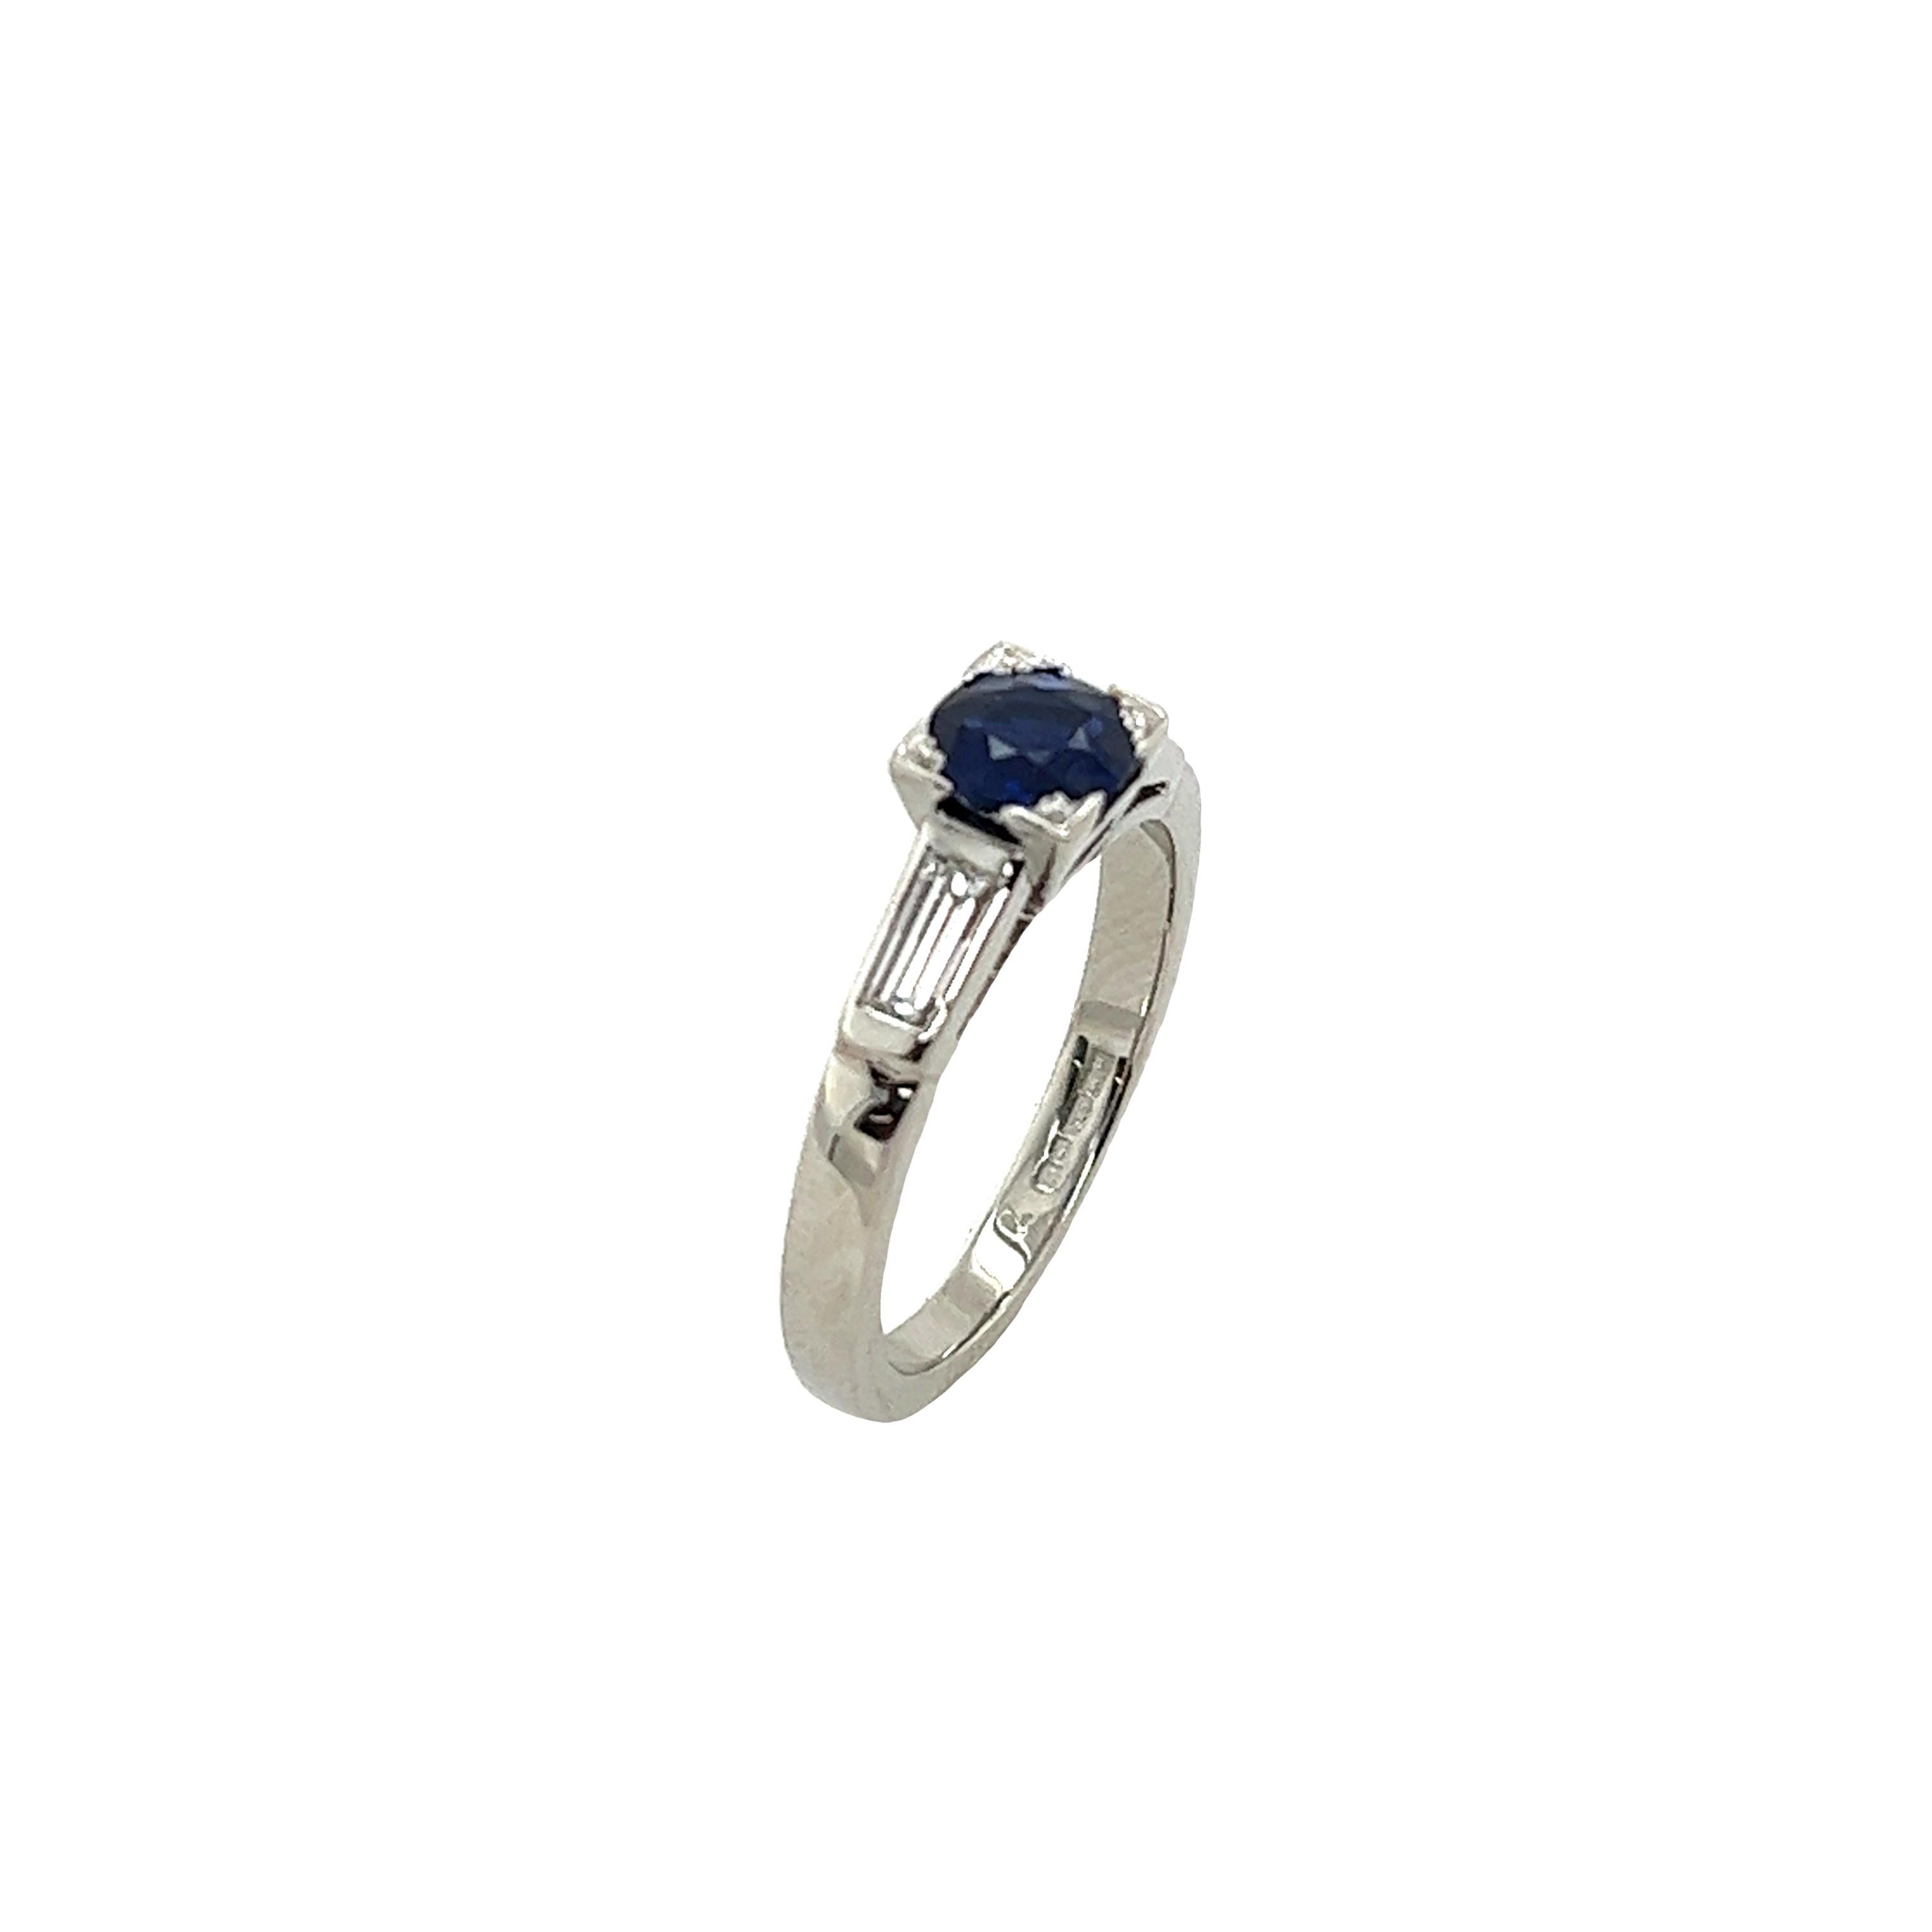 Women's Platinum 0.60ct Sapphire & Diamond Ring Set With 2 Baguettes Diamonds on Sides For Sale